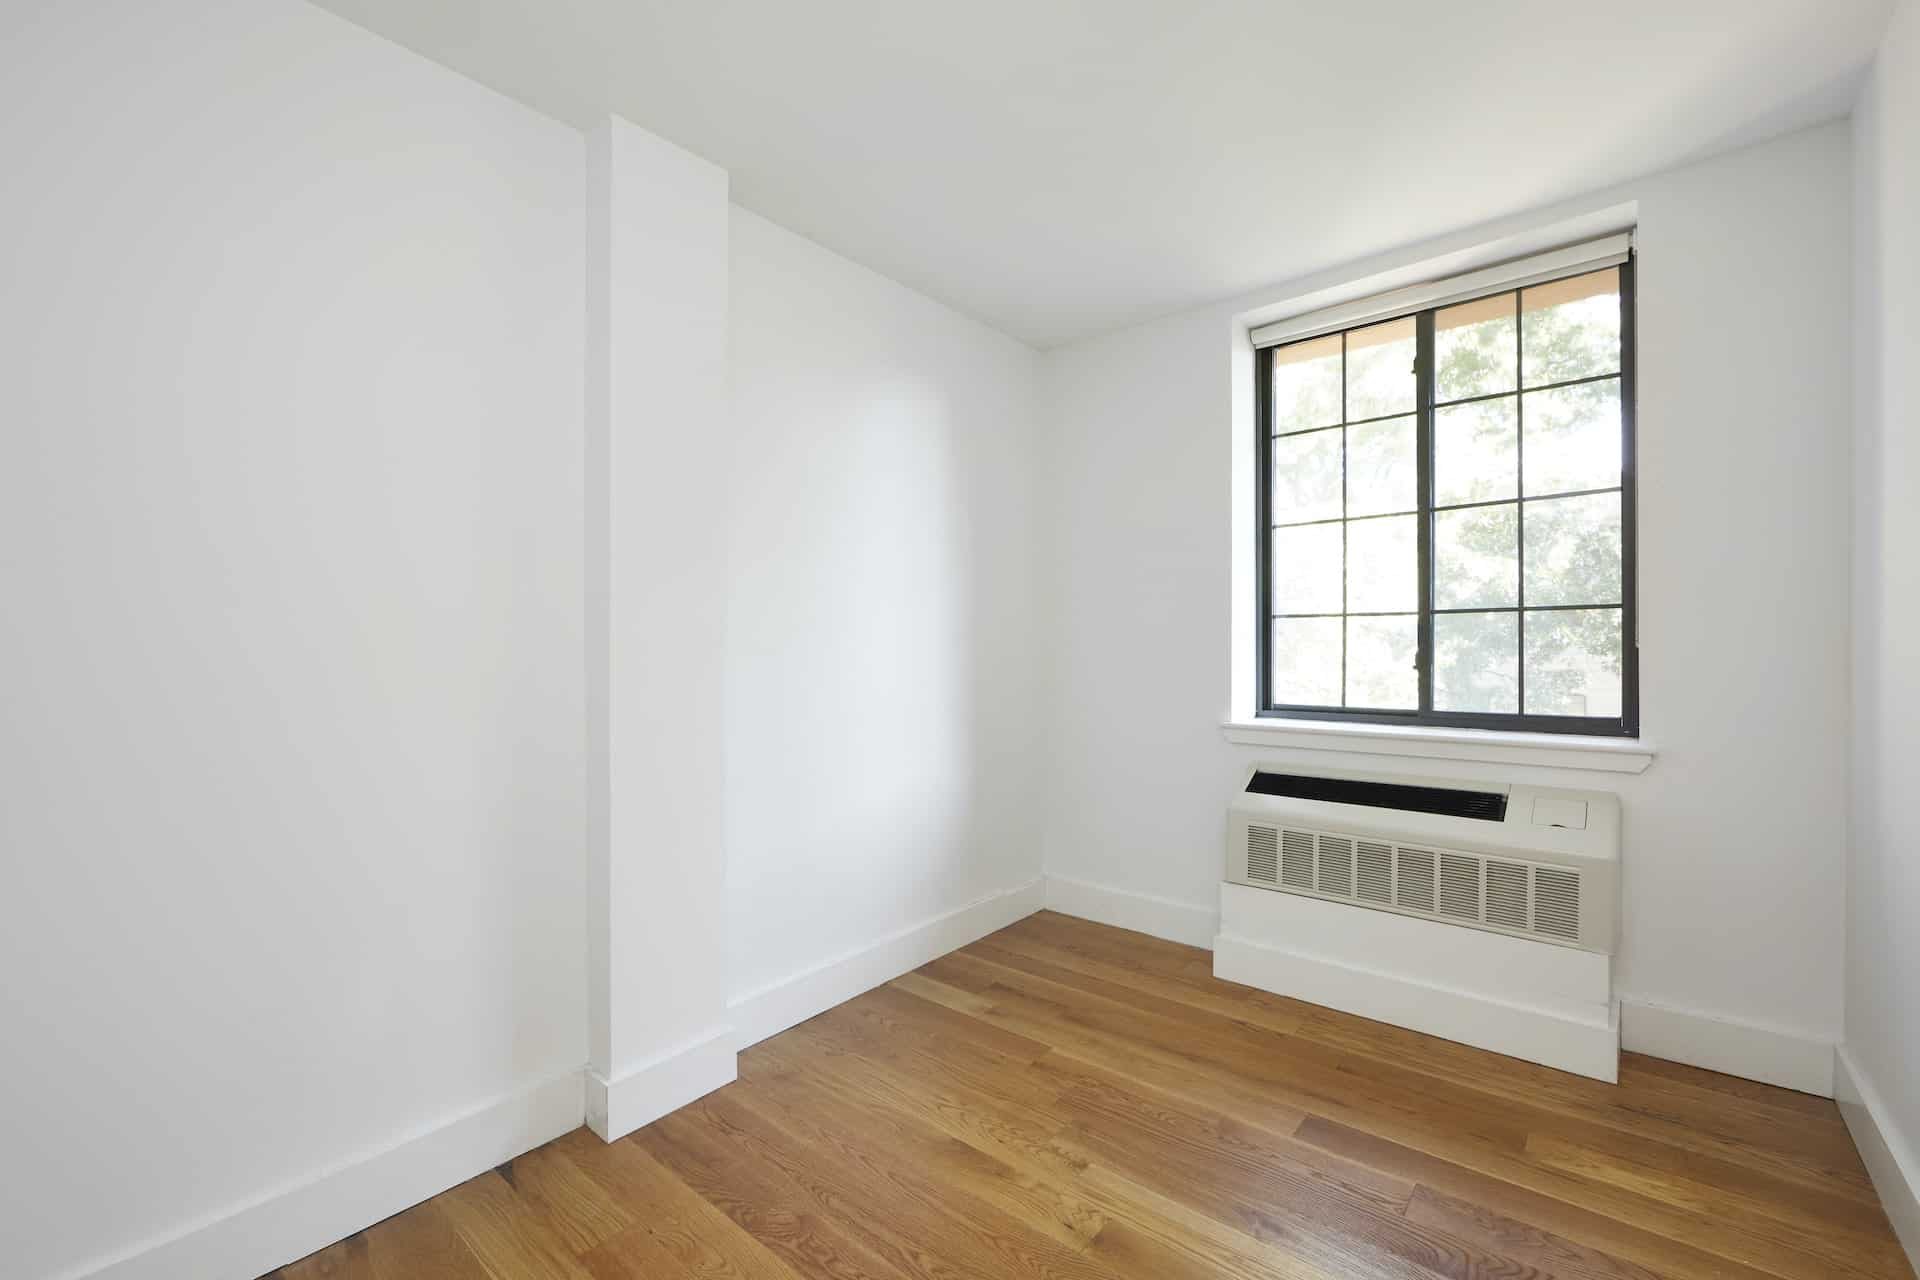 Bedroom at 83 Bushwick Place apartments in Brooklyn with hardwood floors, a/c unit and a large window.